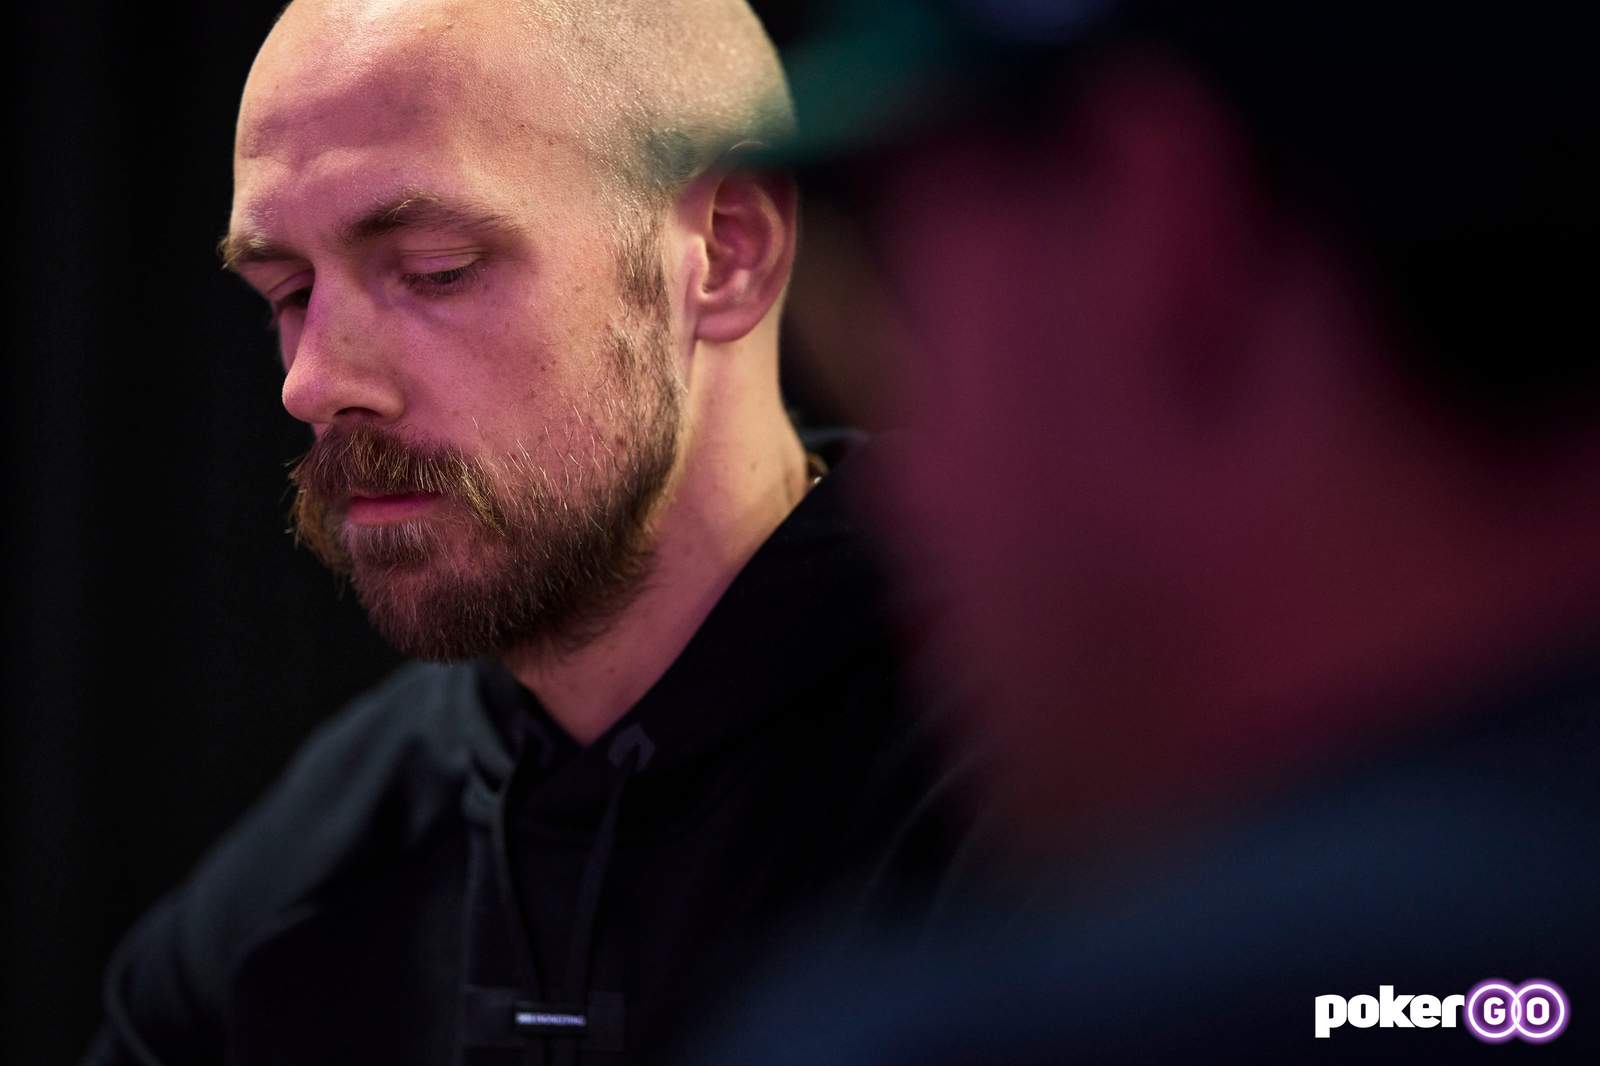 Stephen Chidwick Leads PokerGO Cup Event #5 Final Table